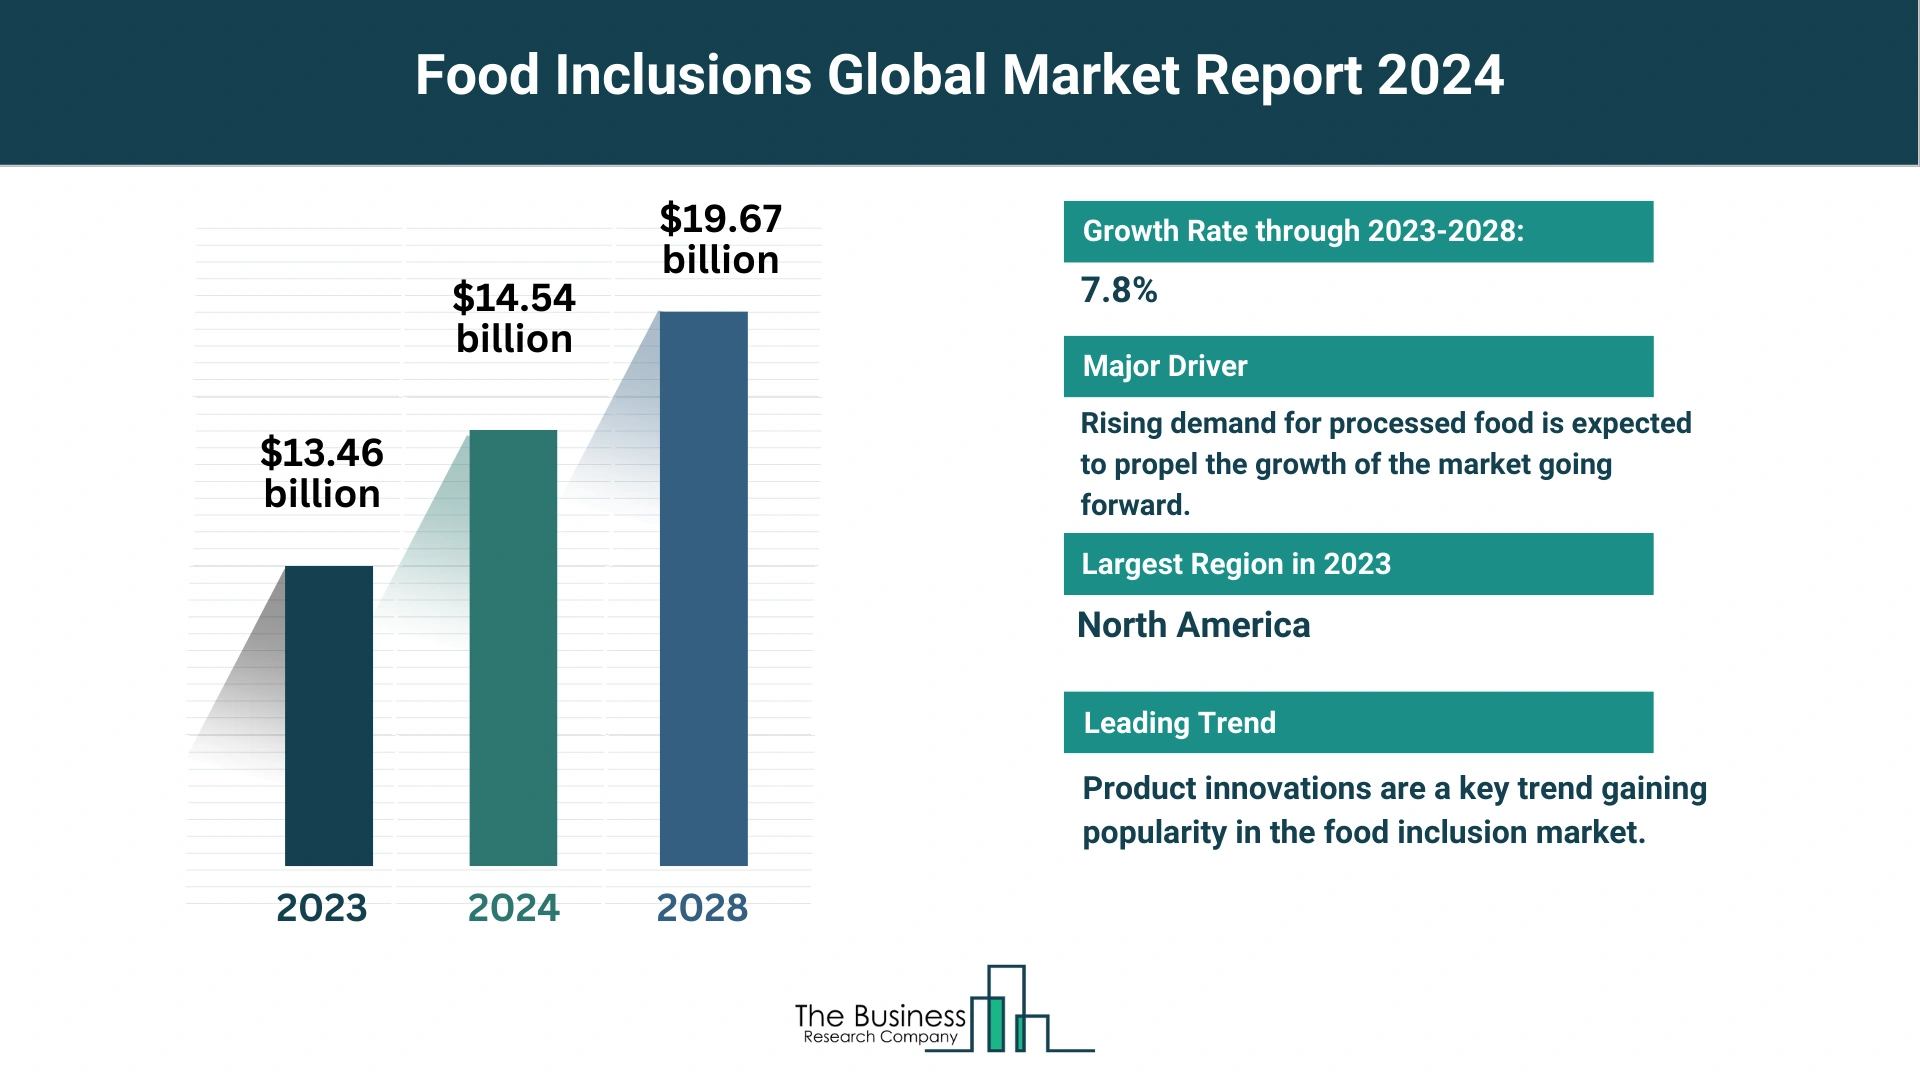 Global Food Inclusions Market